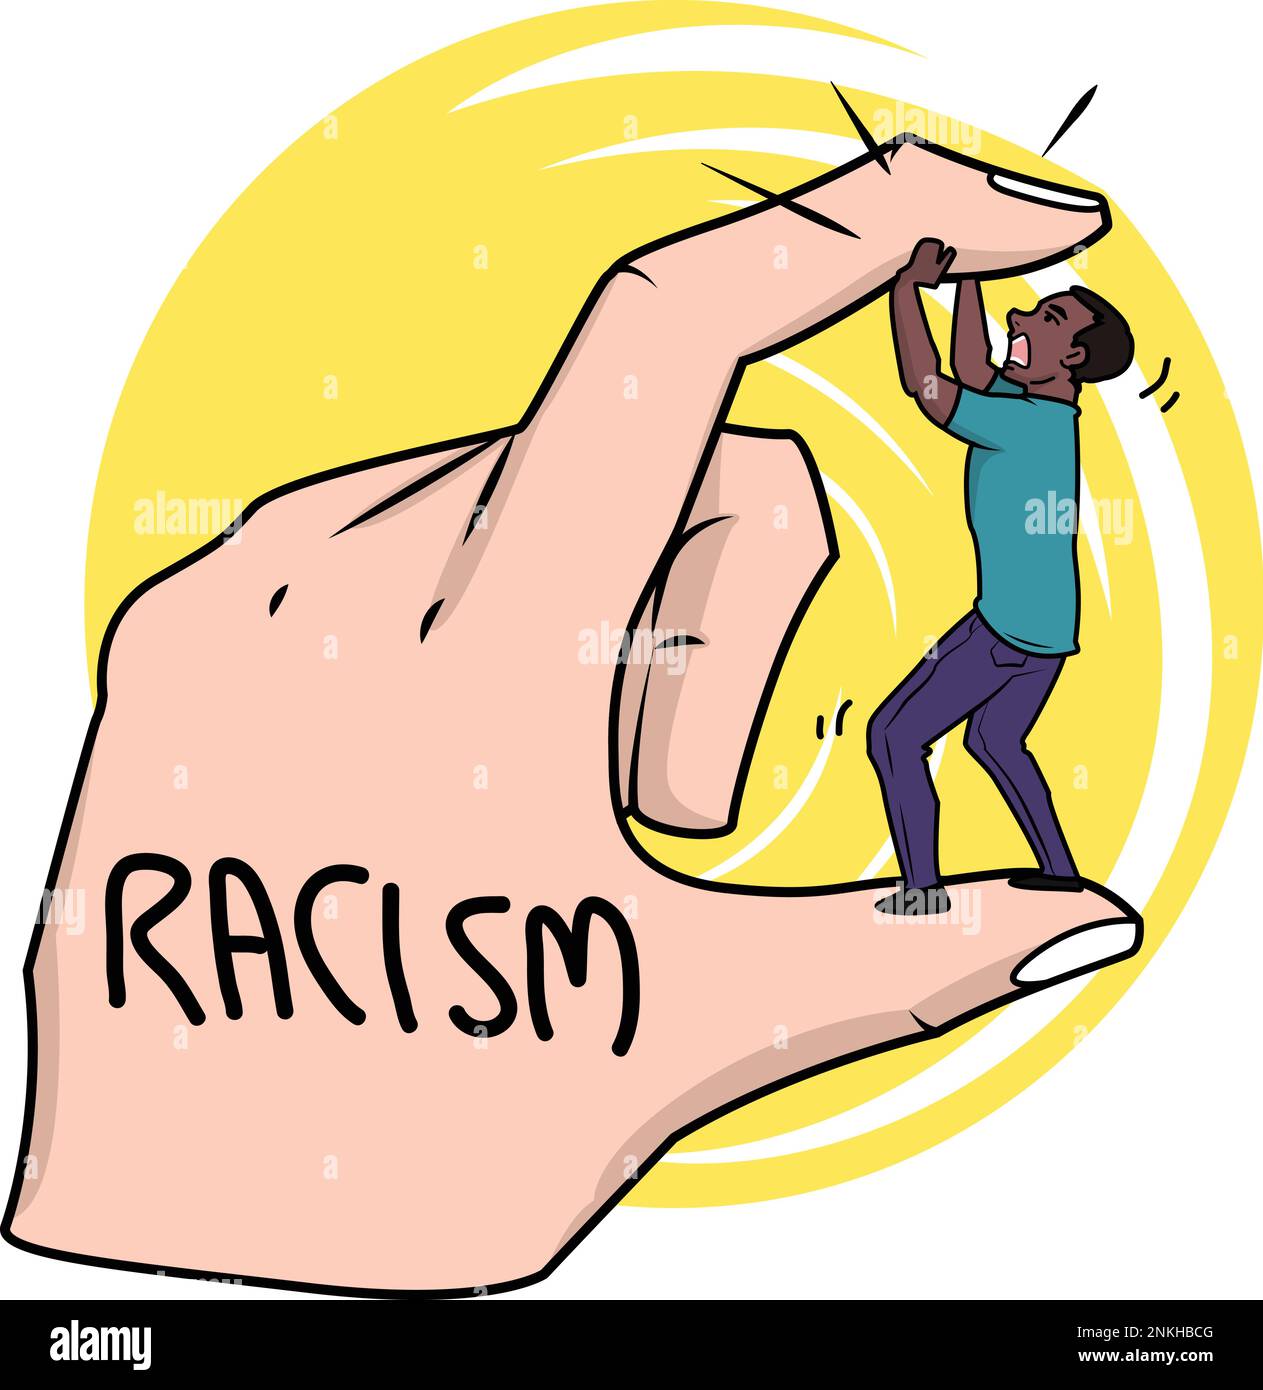 Black Lives Matter, BLM, No Racism, Statement. Young African Americans: man and woman against racism. Black citizens are fighting for equality. Stock Vector